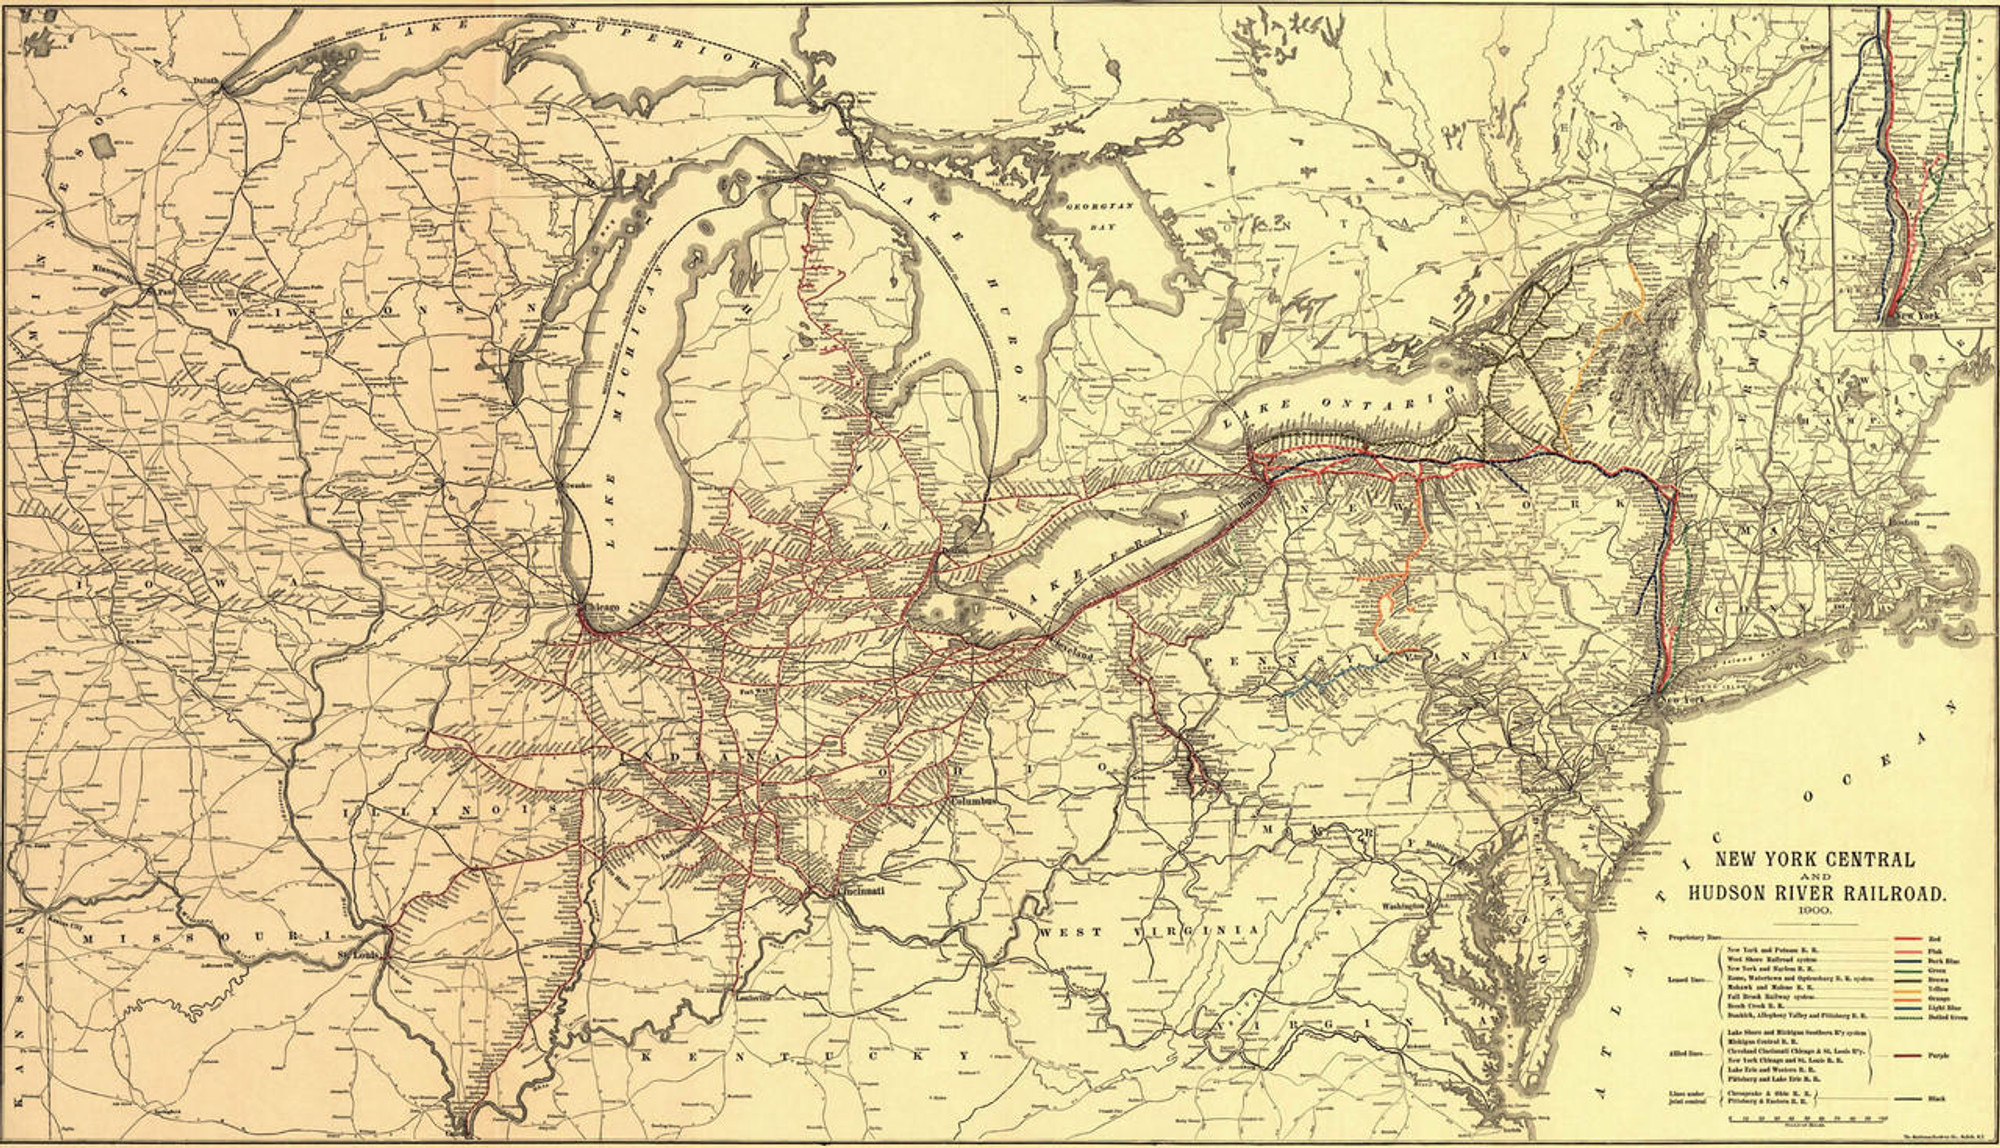 Historic Railroad Map of the Northeastern United States - 1900, image 1, World Maps Online